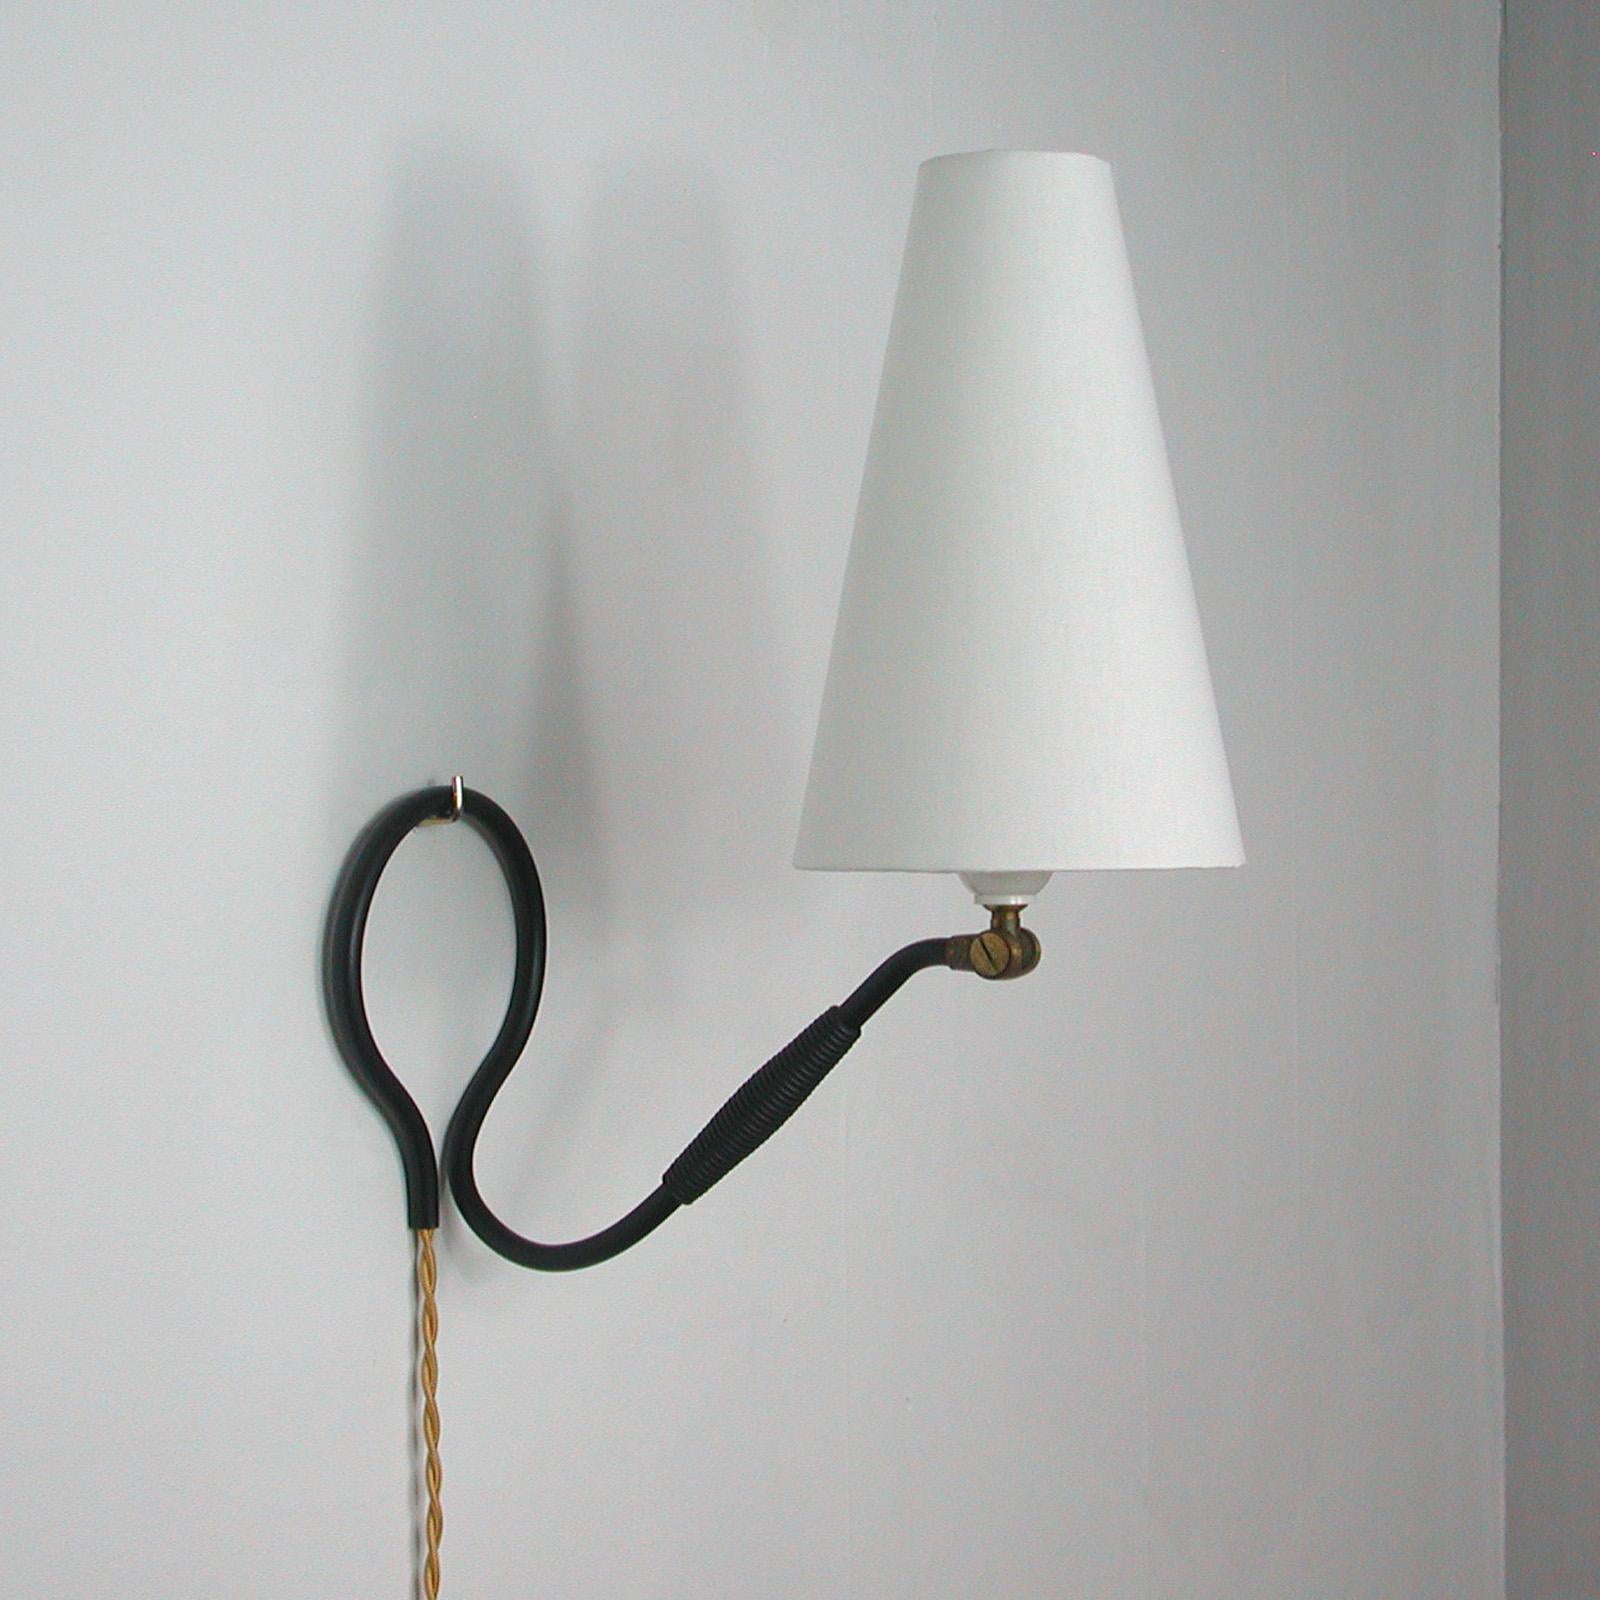 Adjustable Black Brass and Bakelite Wall or Table Lamp 306 by Kaare Klint, 1950s For Sale 11